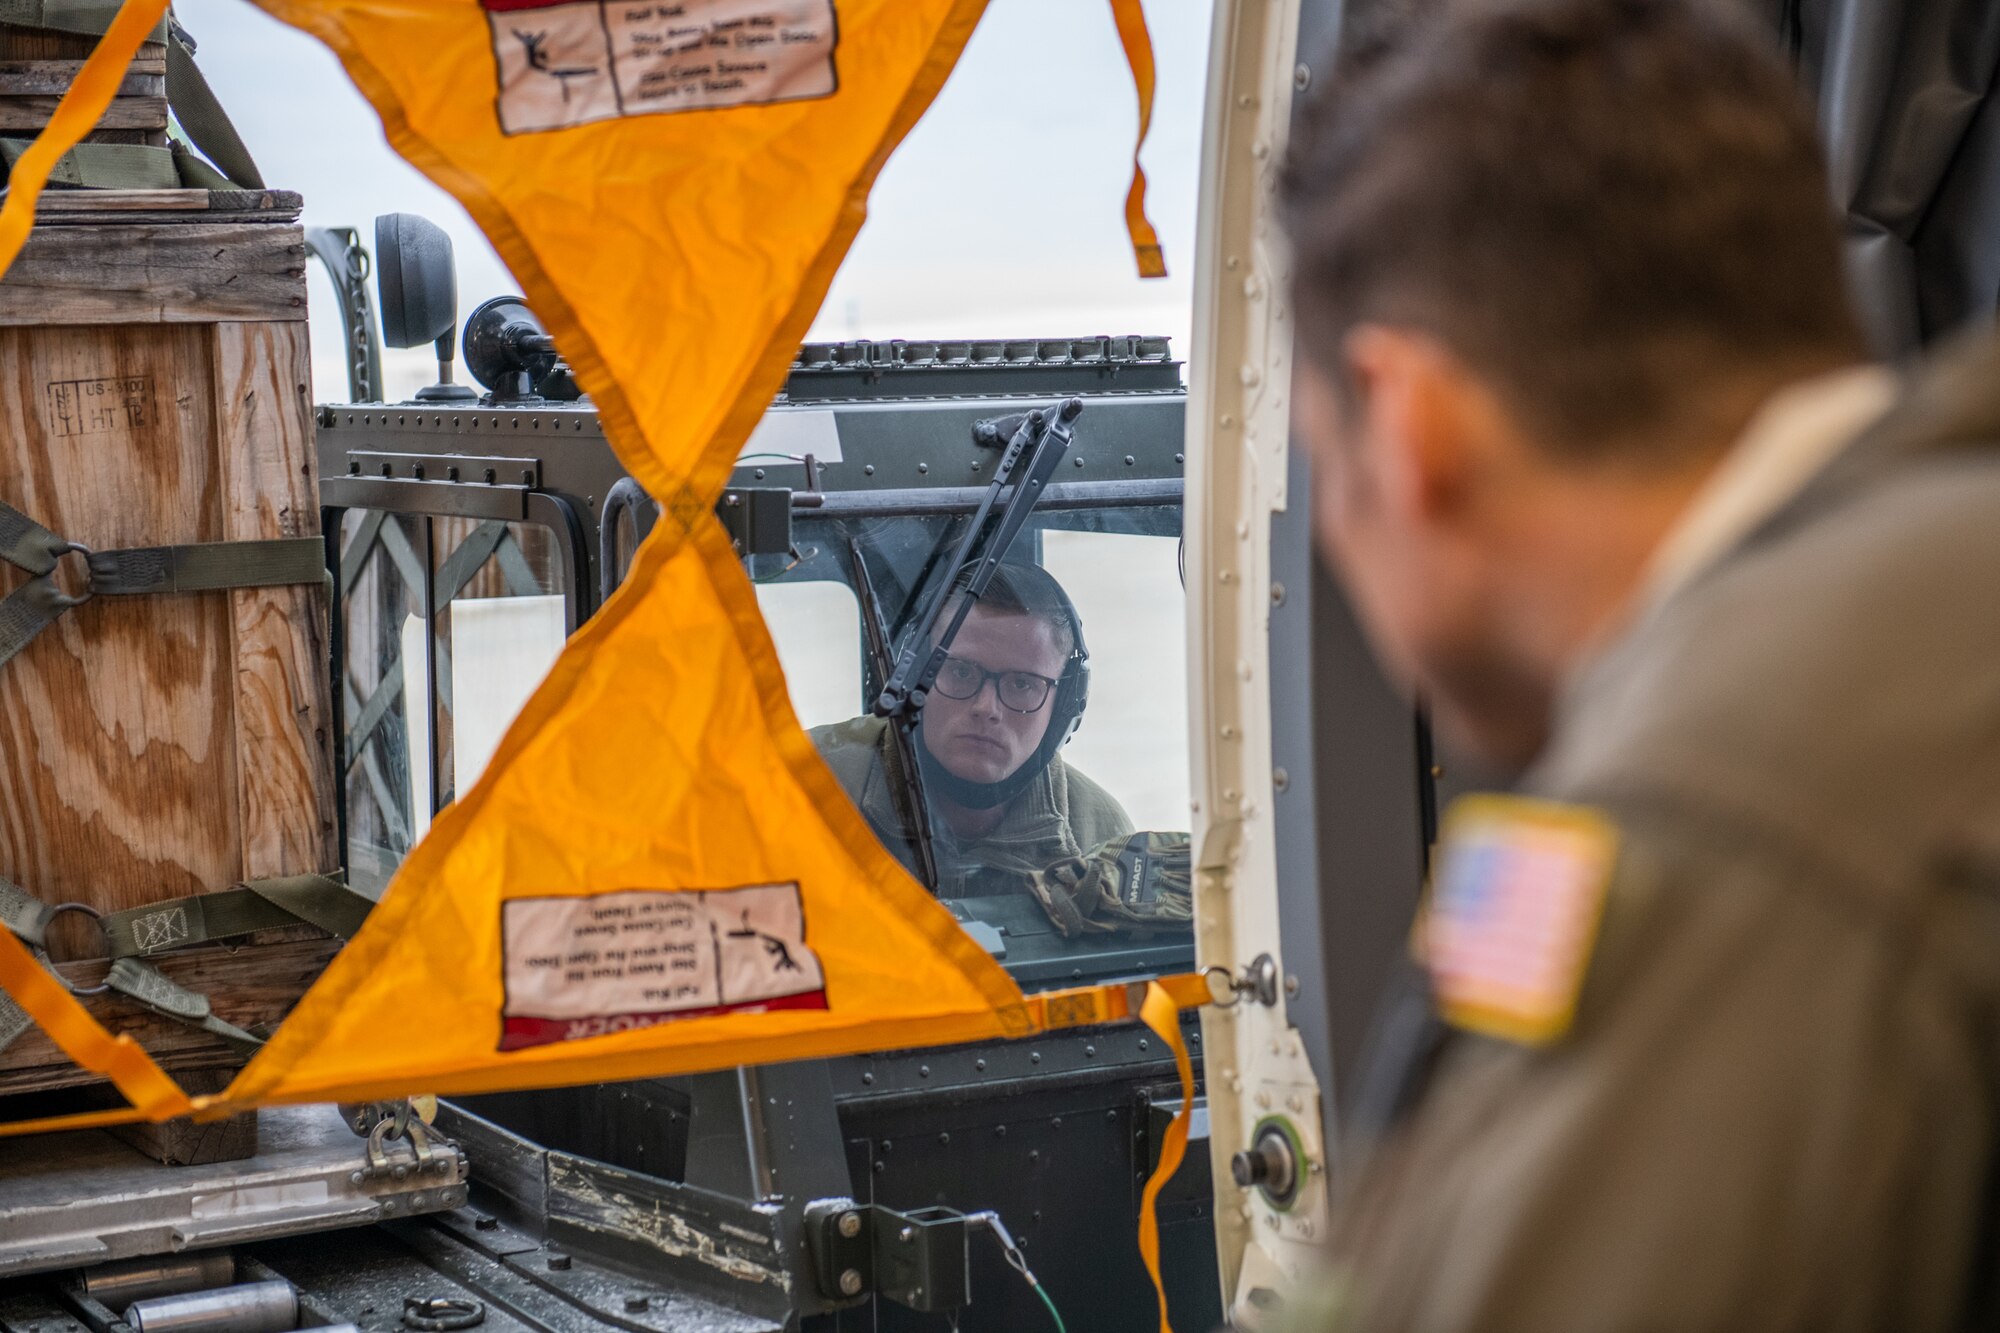 Tech. Sgt. Chris Davis, a boom operator from the 916th Air Refueling Wing, marshals Staff Sgt. Todd Rimmasch, an air transportation specialist in the 67th Aerial Port Squadron, in docking an aircraft cargo loader, Jan. 10, 2021, at Hill Air Force Base, Utah.